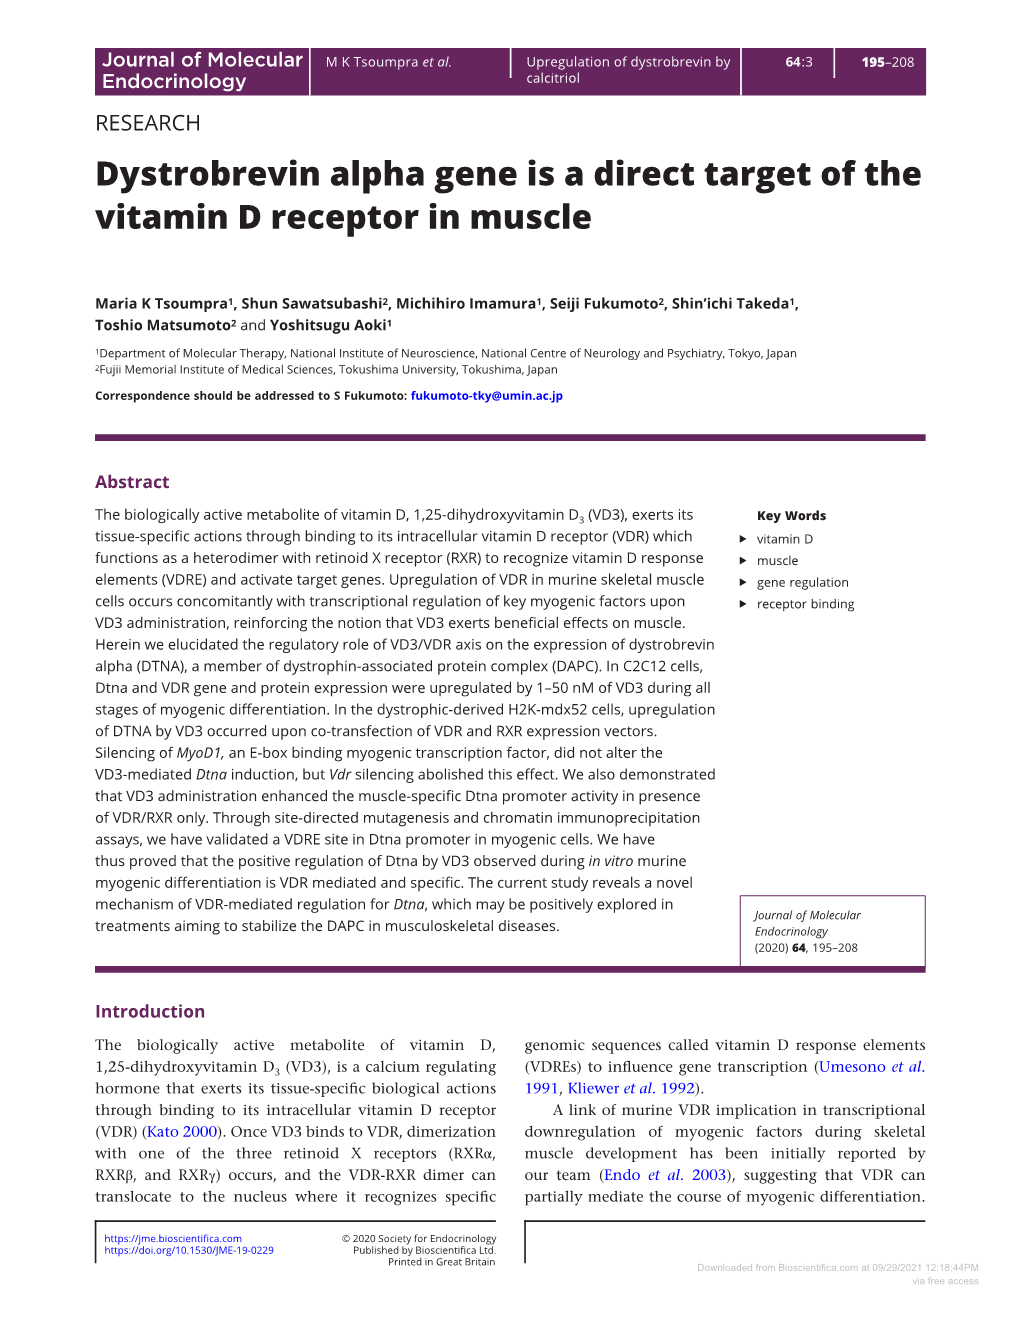 Dystrobrevin Alpha Gene Is a Direct Target of the Vitamin D Receptor in Muscle